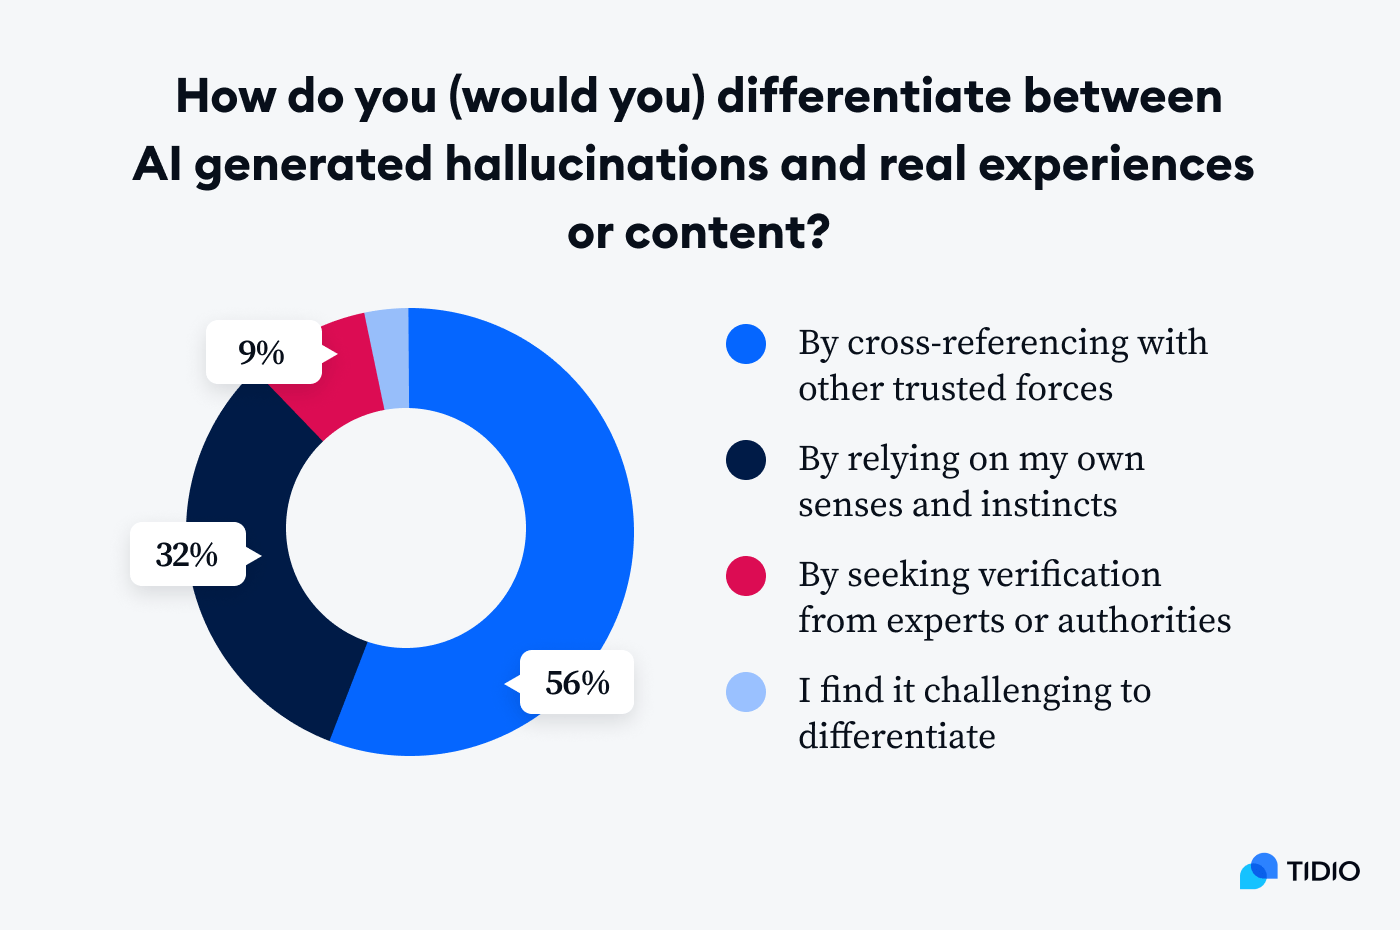 As many as 32% of people spot AI hallucinations by relying on their instincts, while 57% cross-reference with other resources